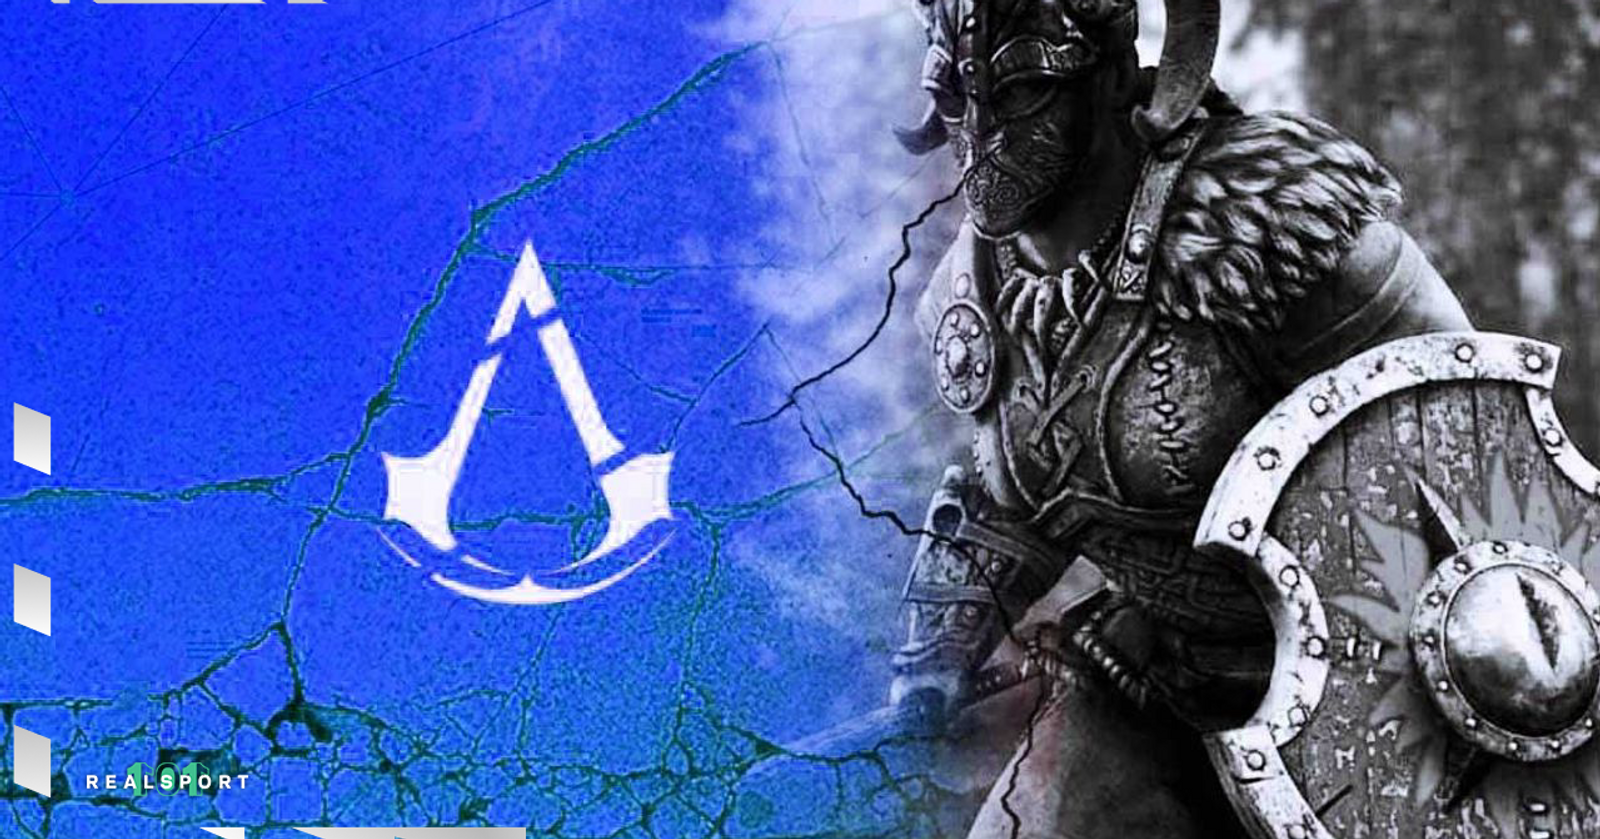 Assassin's Creed Valhalla comes to Steam, no longer an Epic